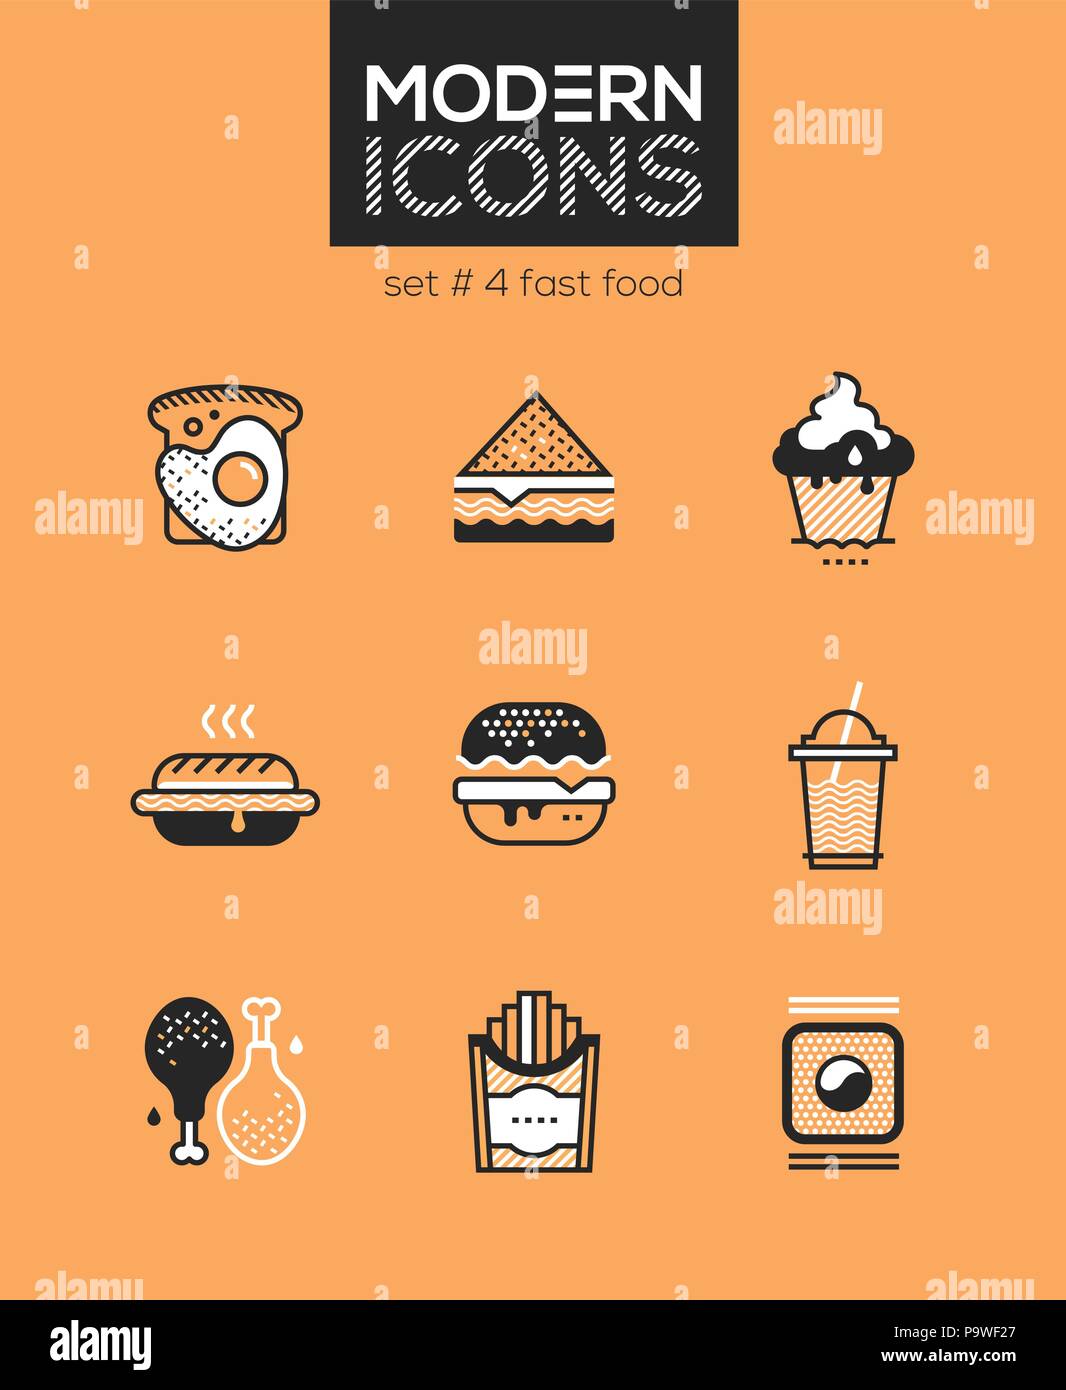 Fast food - set of line design style icons Stock Vector